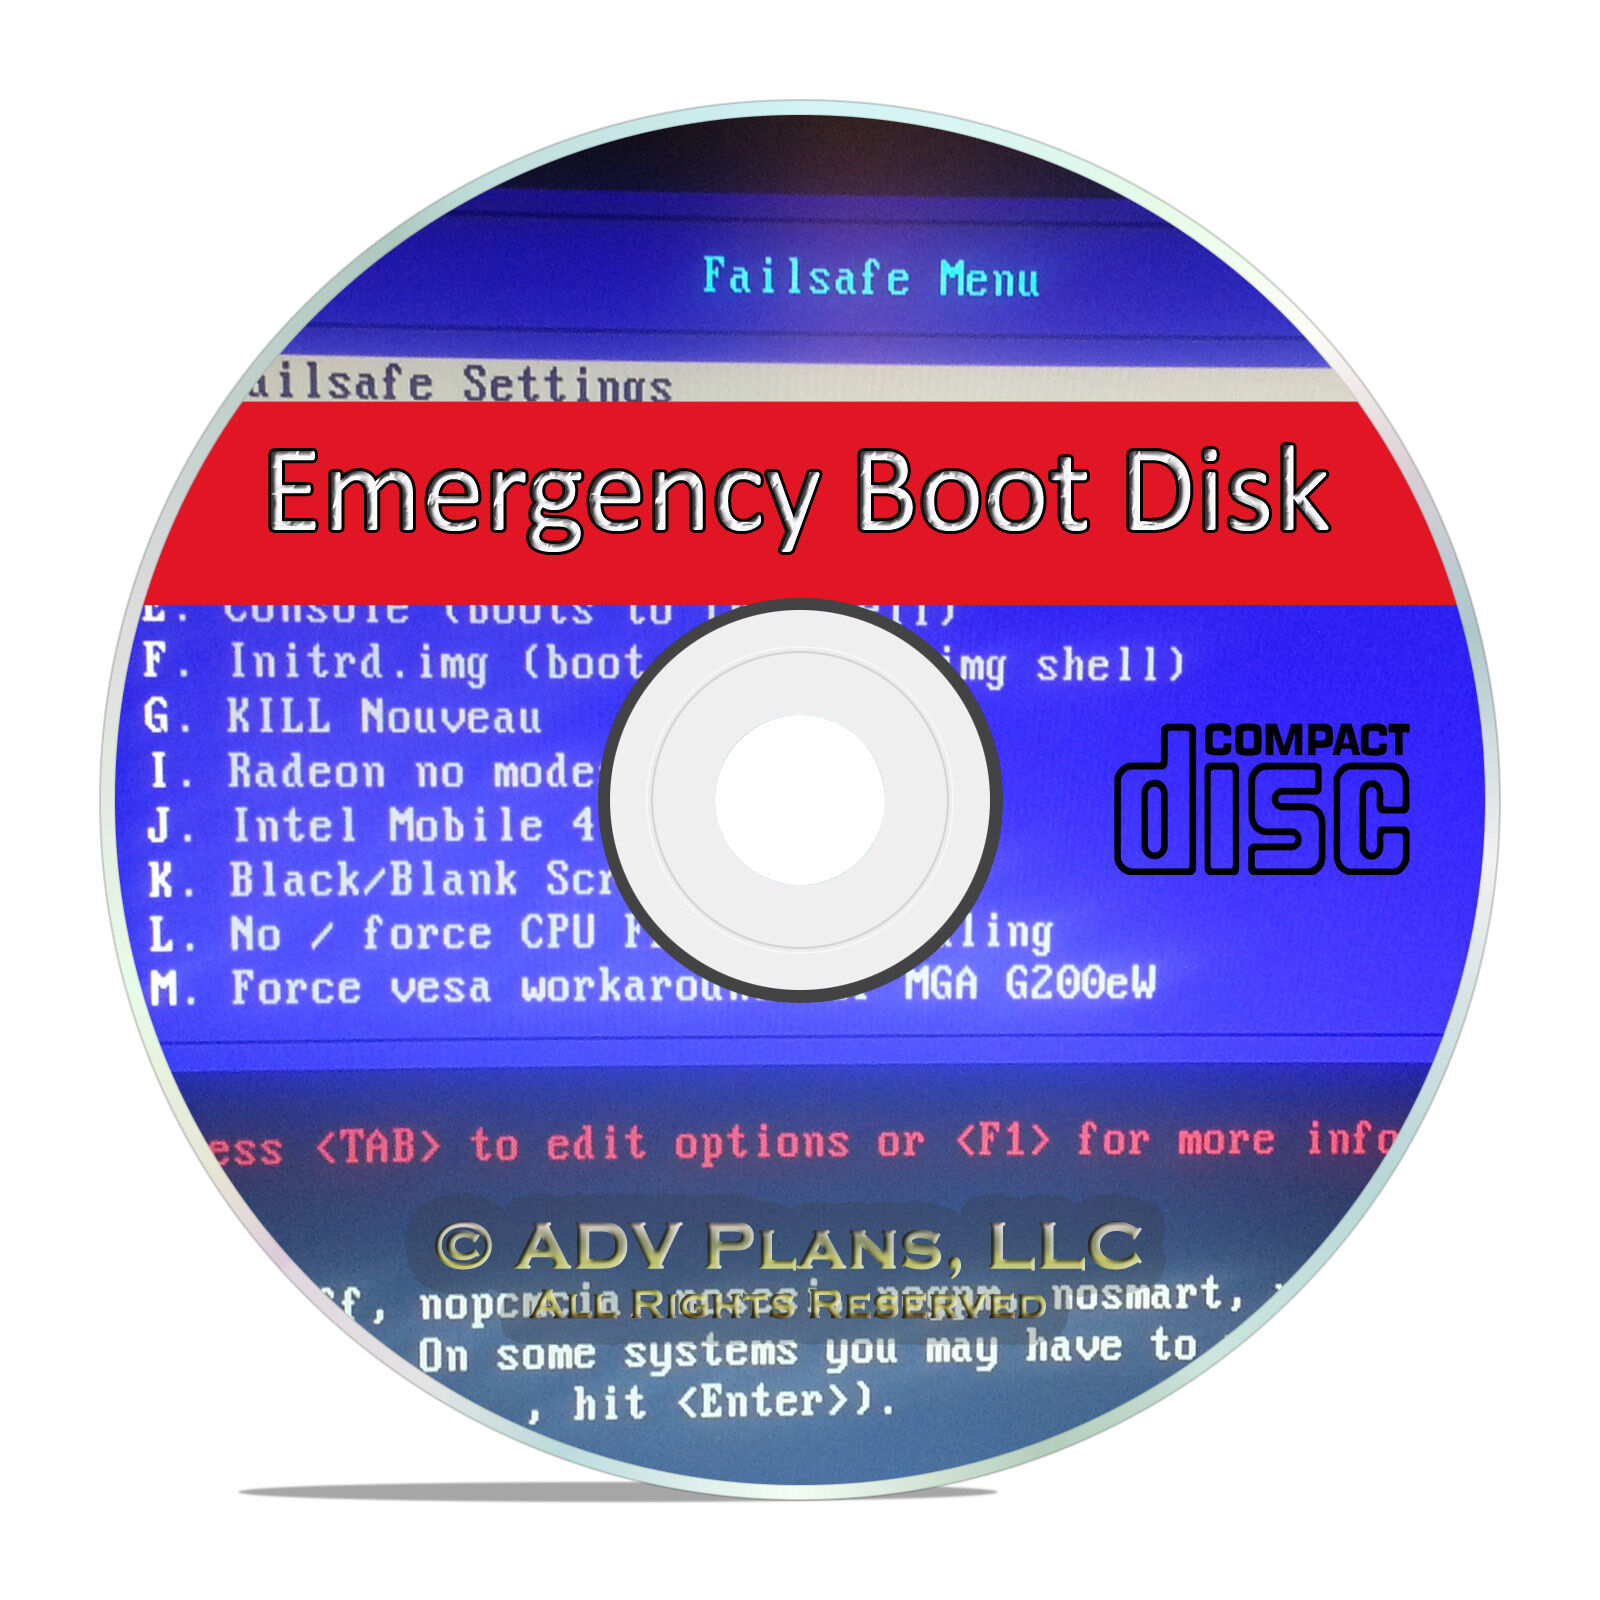 Boot, Format, Restore Emergency Recovery Hard Drive Utility Diagnostics Disk CD